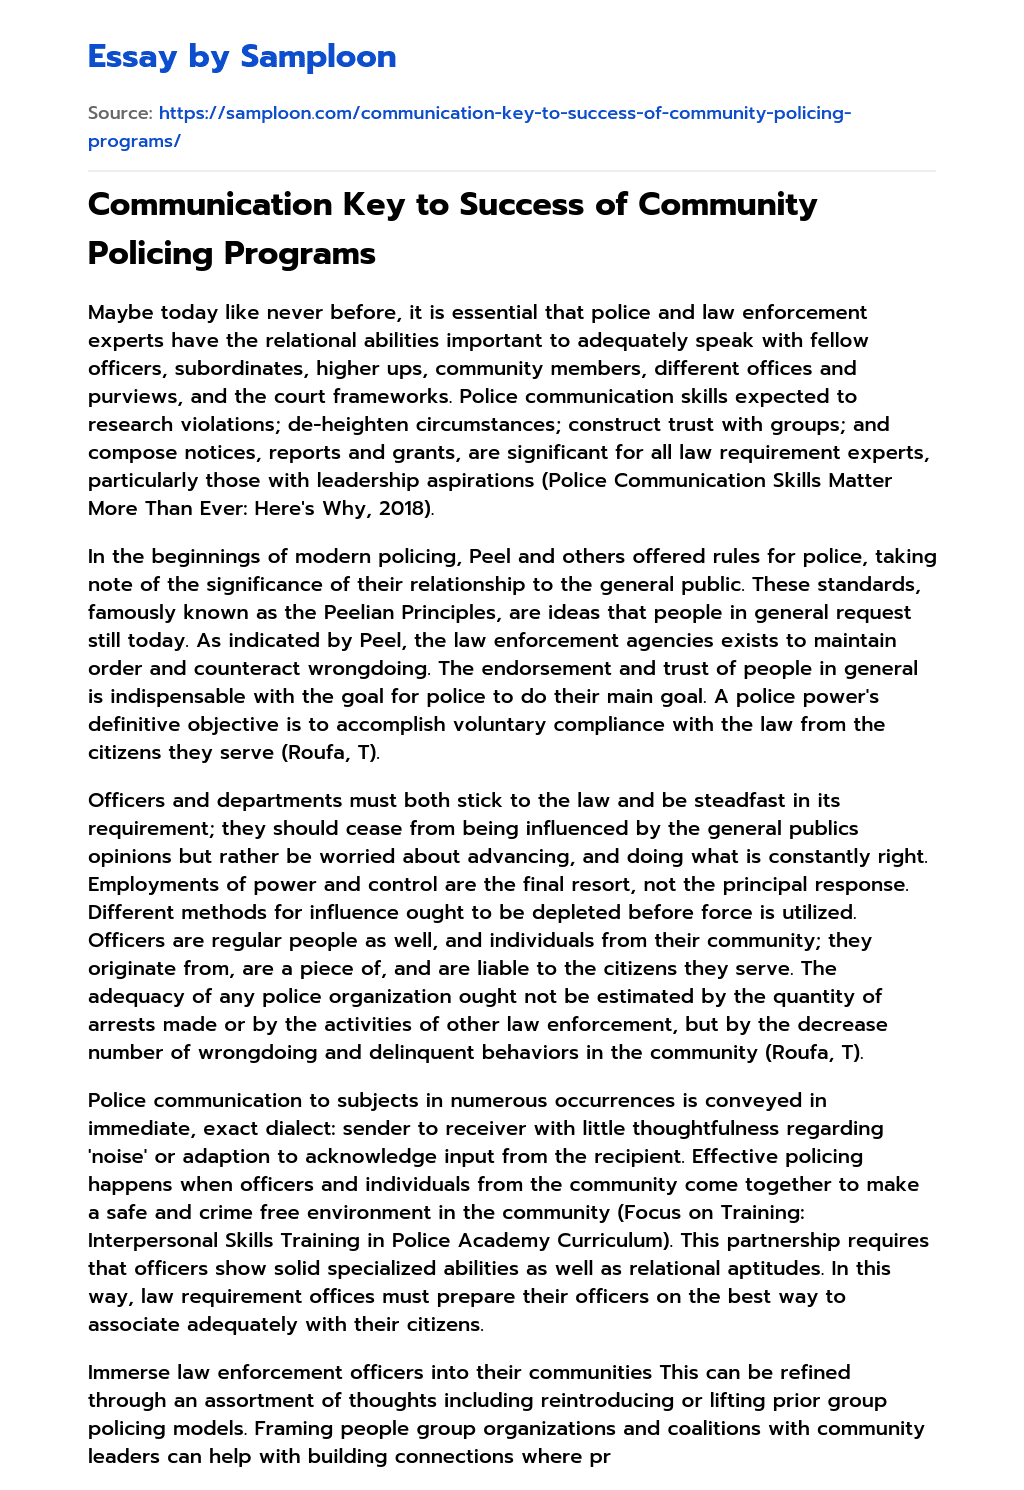 Communication Key to Success of Community Policing Programs essay